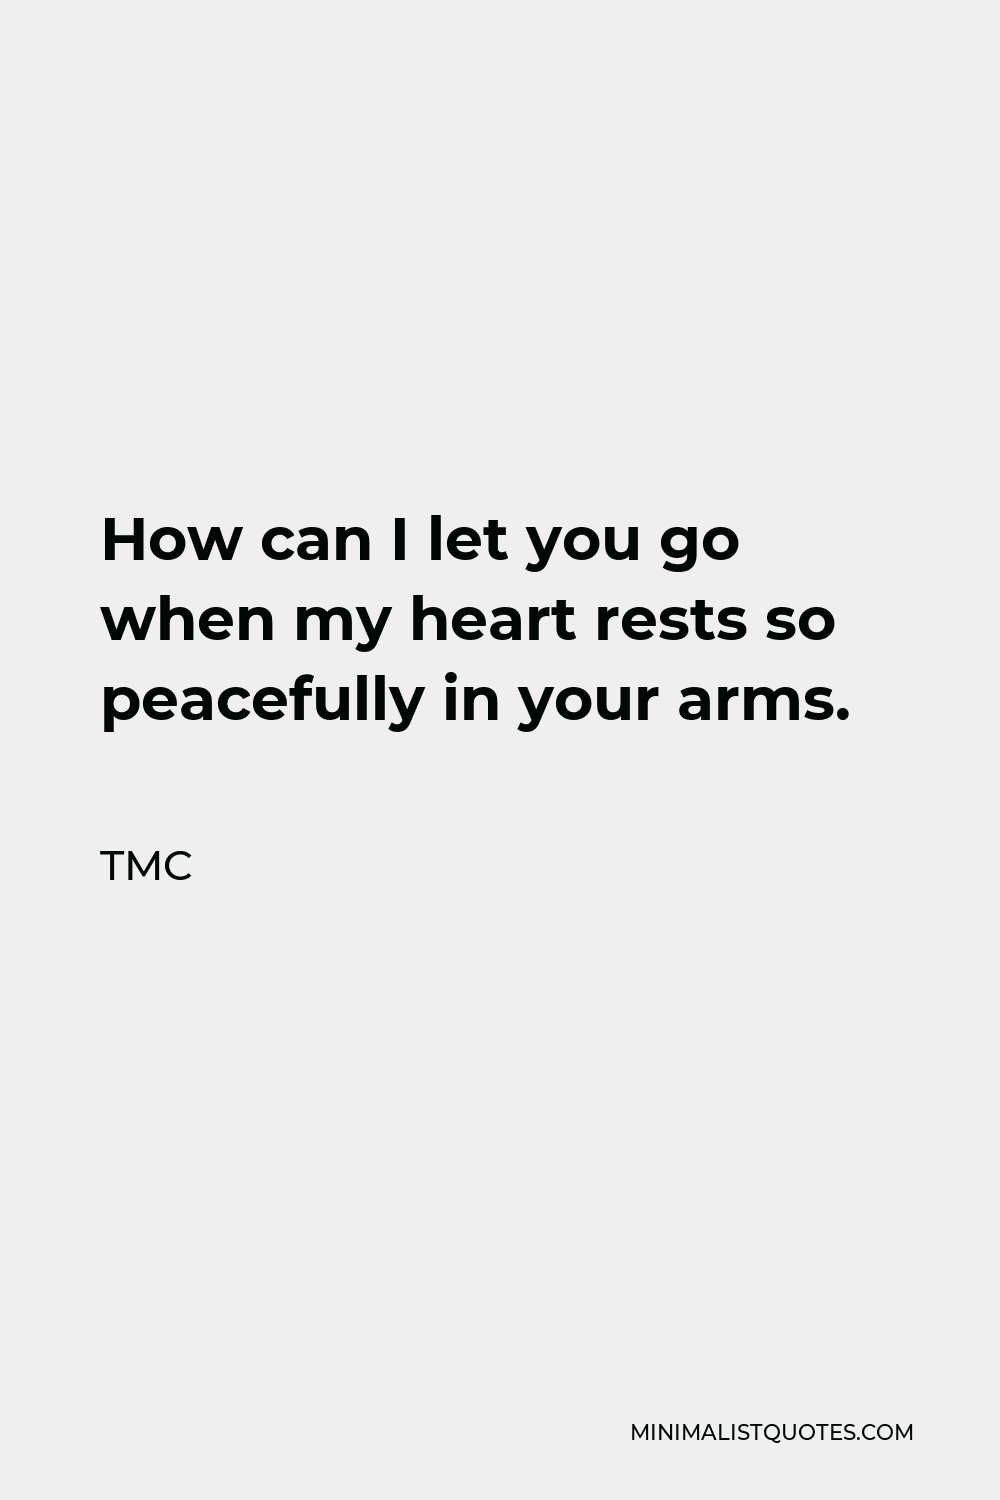 TMC Quote - How can I let you go when my heart rests so peacefully in your arms.